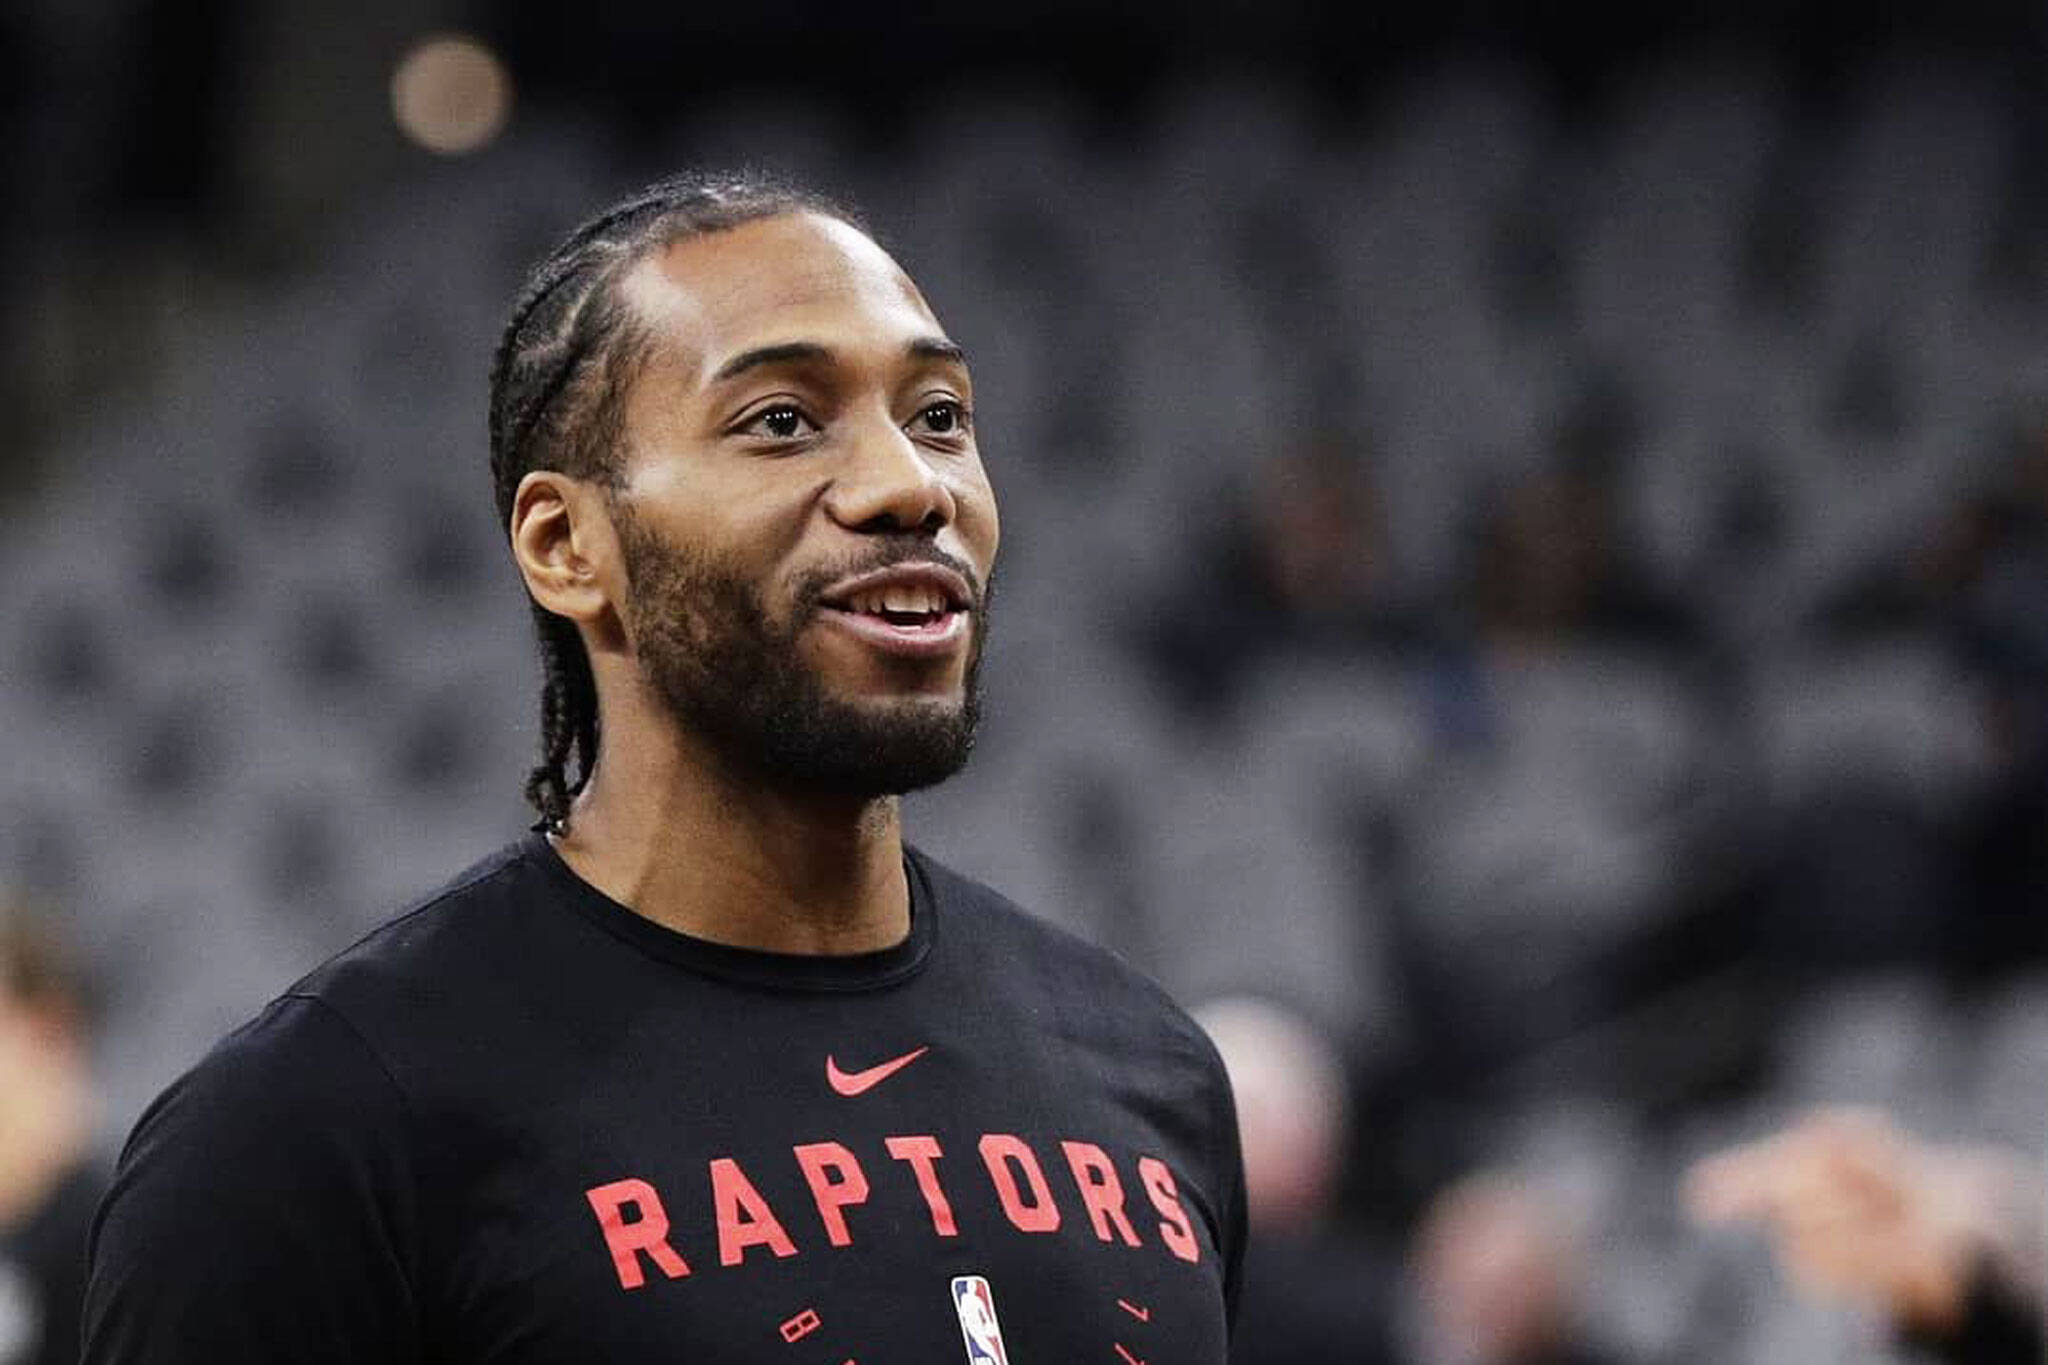 People in Canada are now naming their babies after Kawhi Leonard